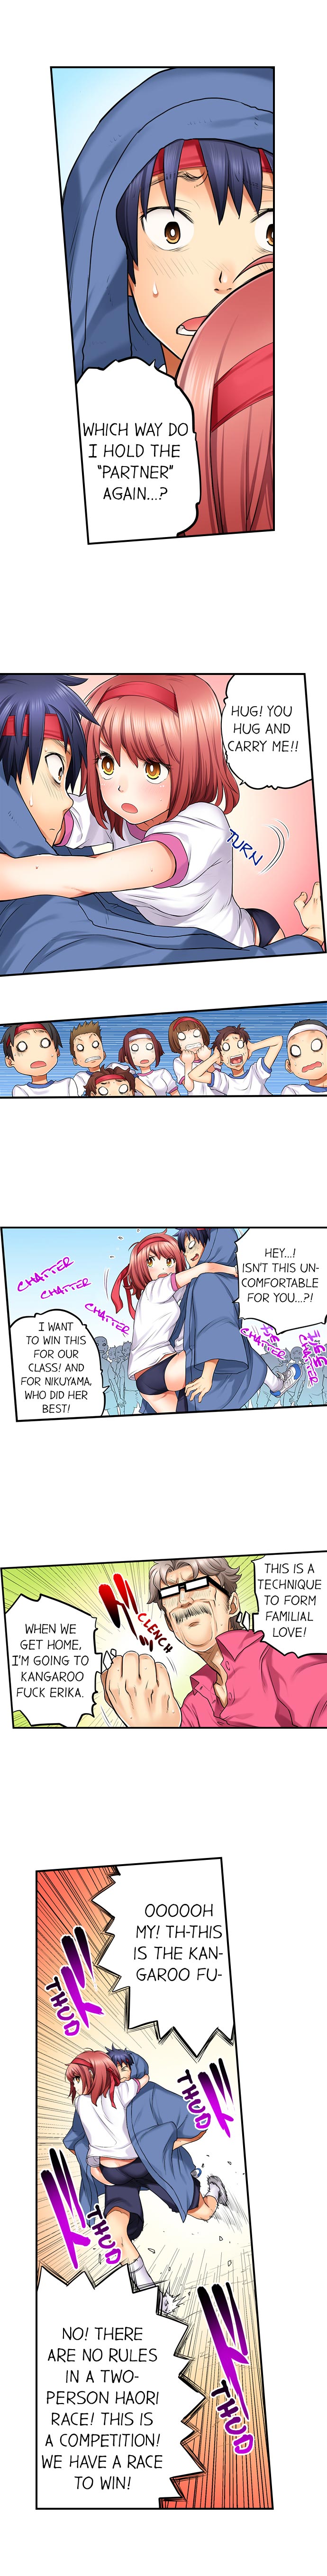 My Classmate is My Dad’s Bride, But in Bed She’s Mine - Chapter 7 Page 7